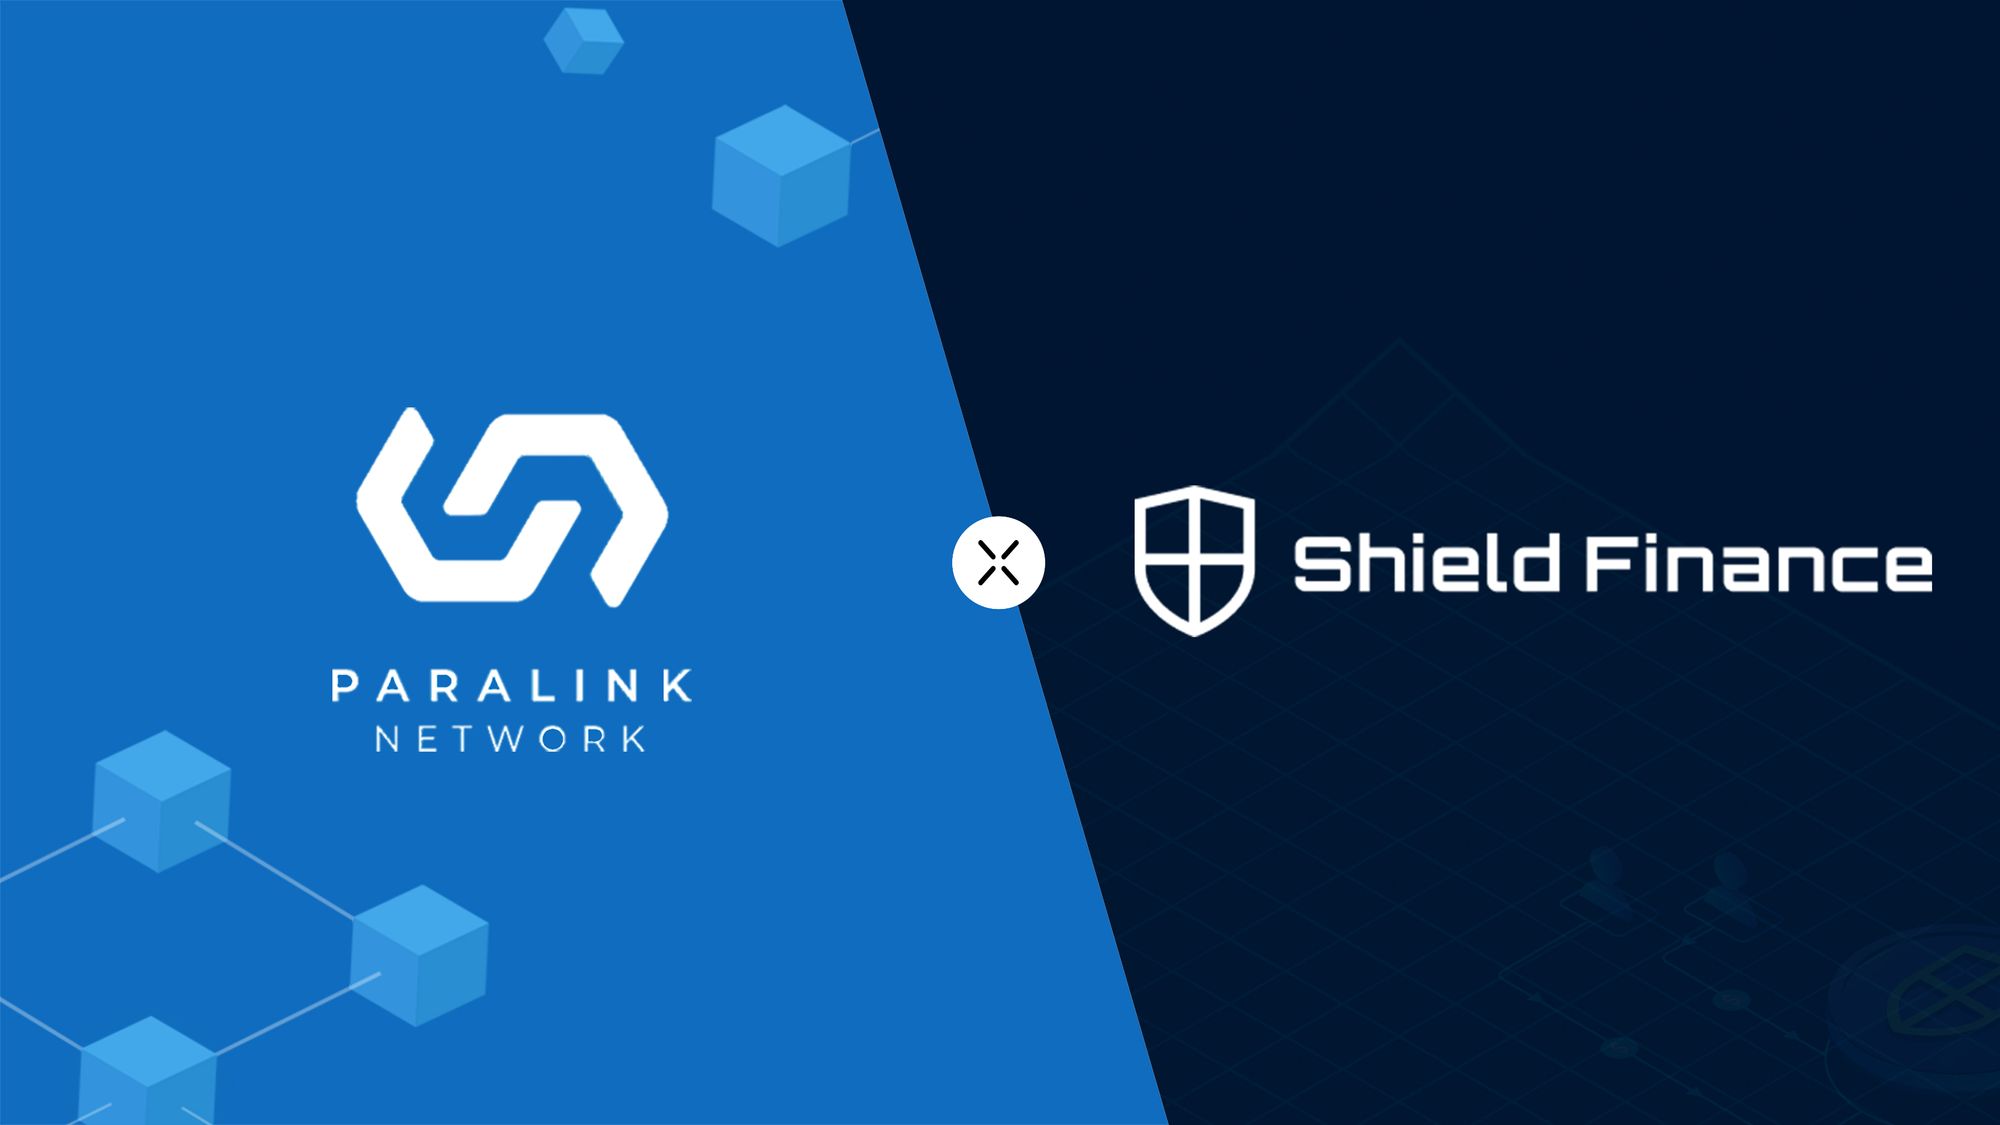 Paralink and Shield Finance are partnering to integrate further Multi-Chain Oracle solutions!